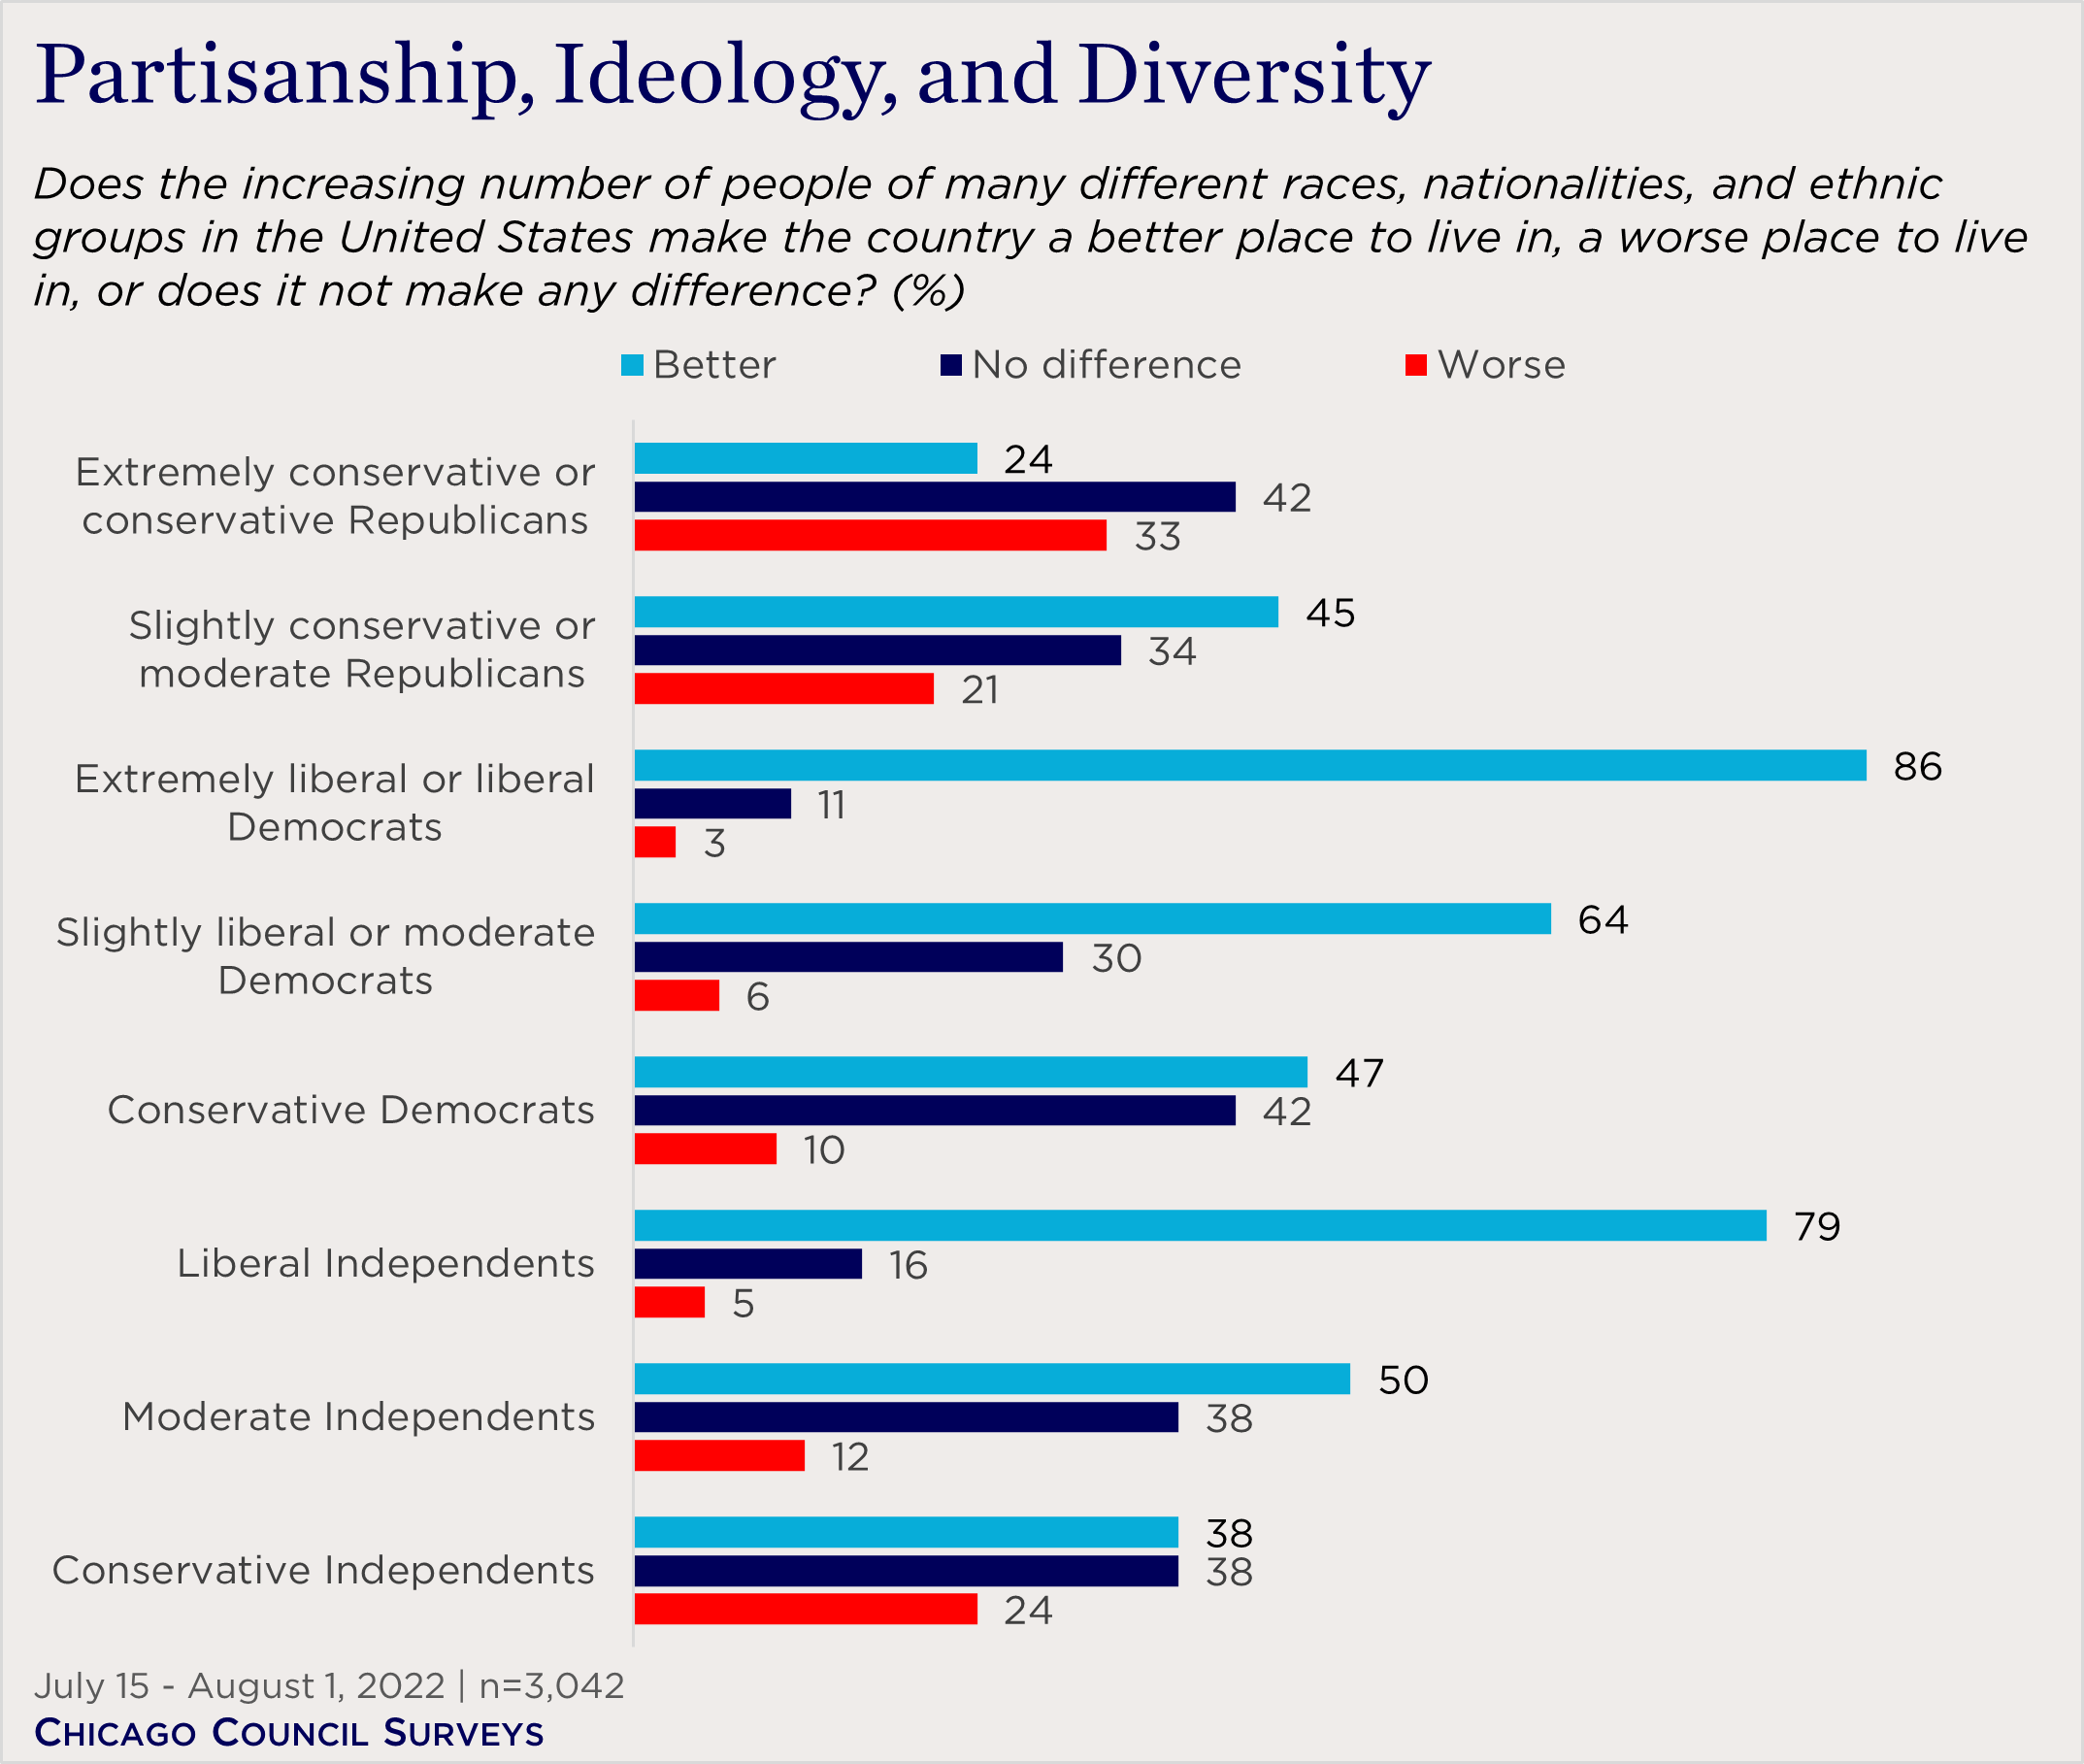 "bar chart showing ideological views on diversity and immigration "